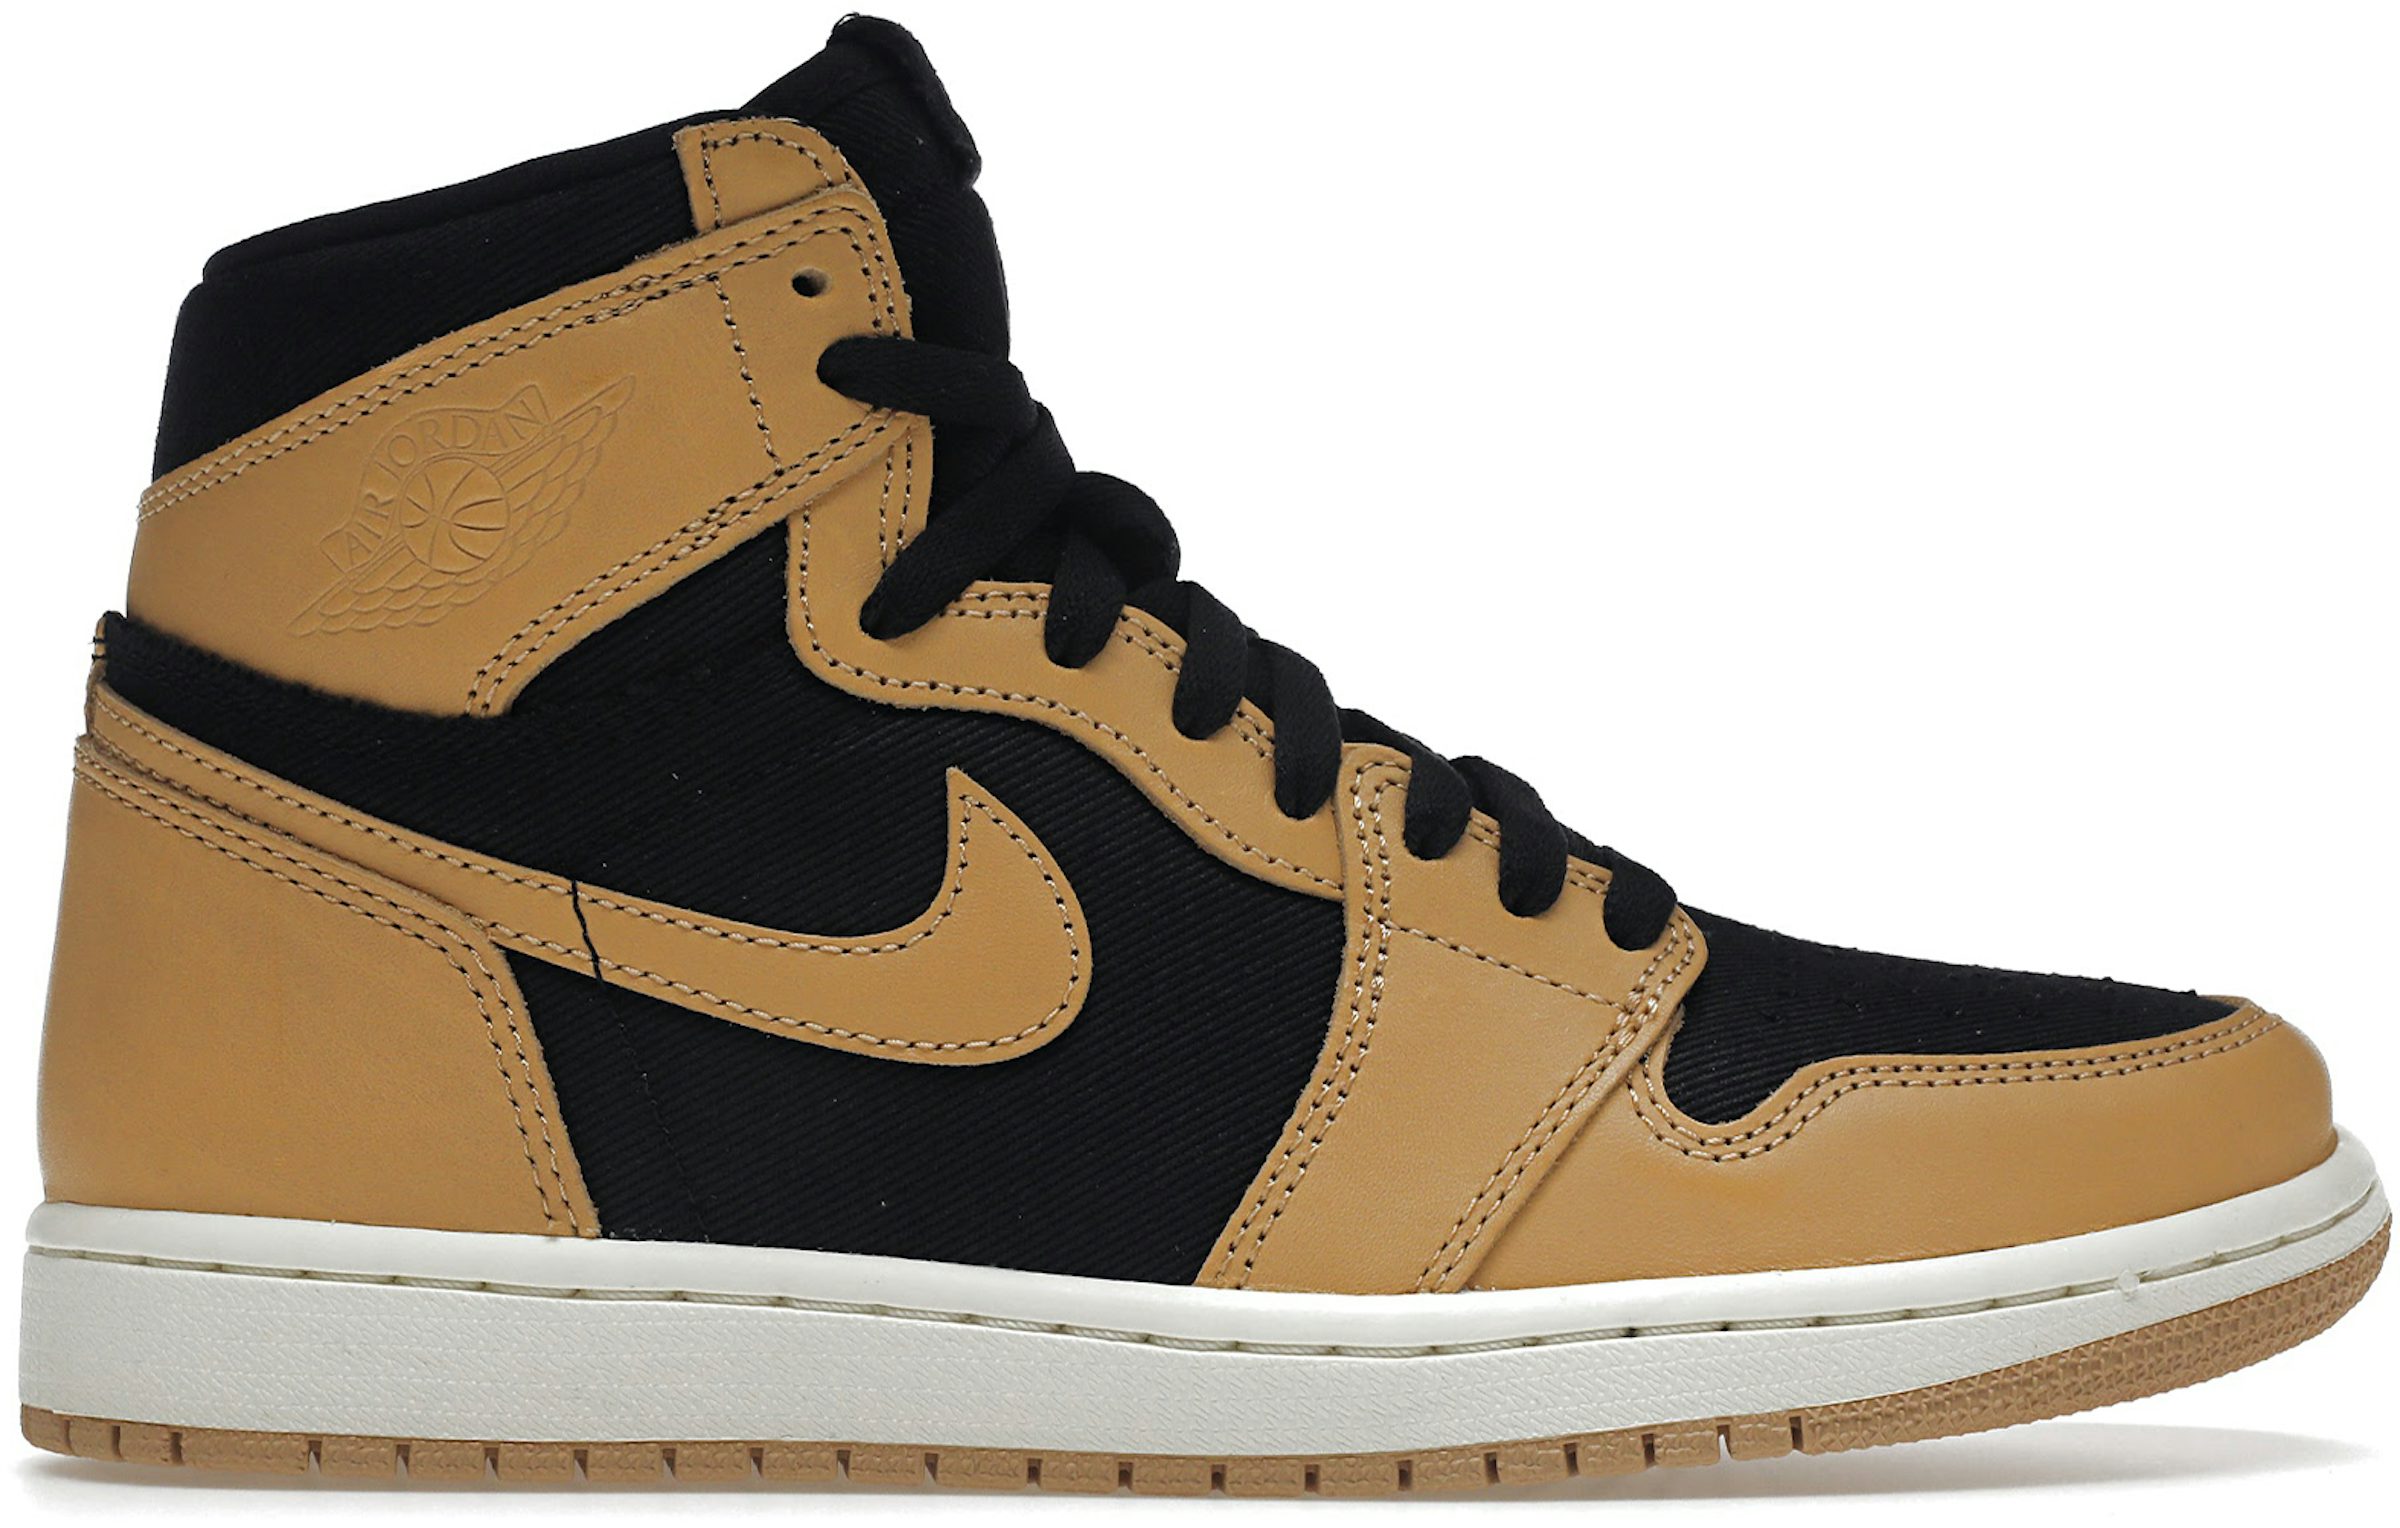 Check Out the Details on These Louis Vuitton x Air Jordan 1s